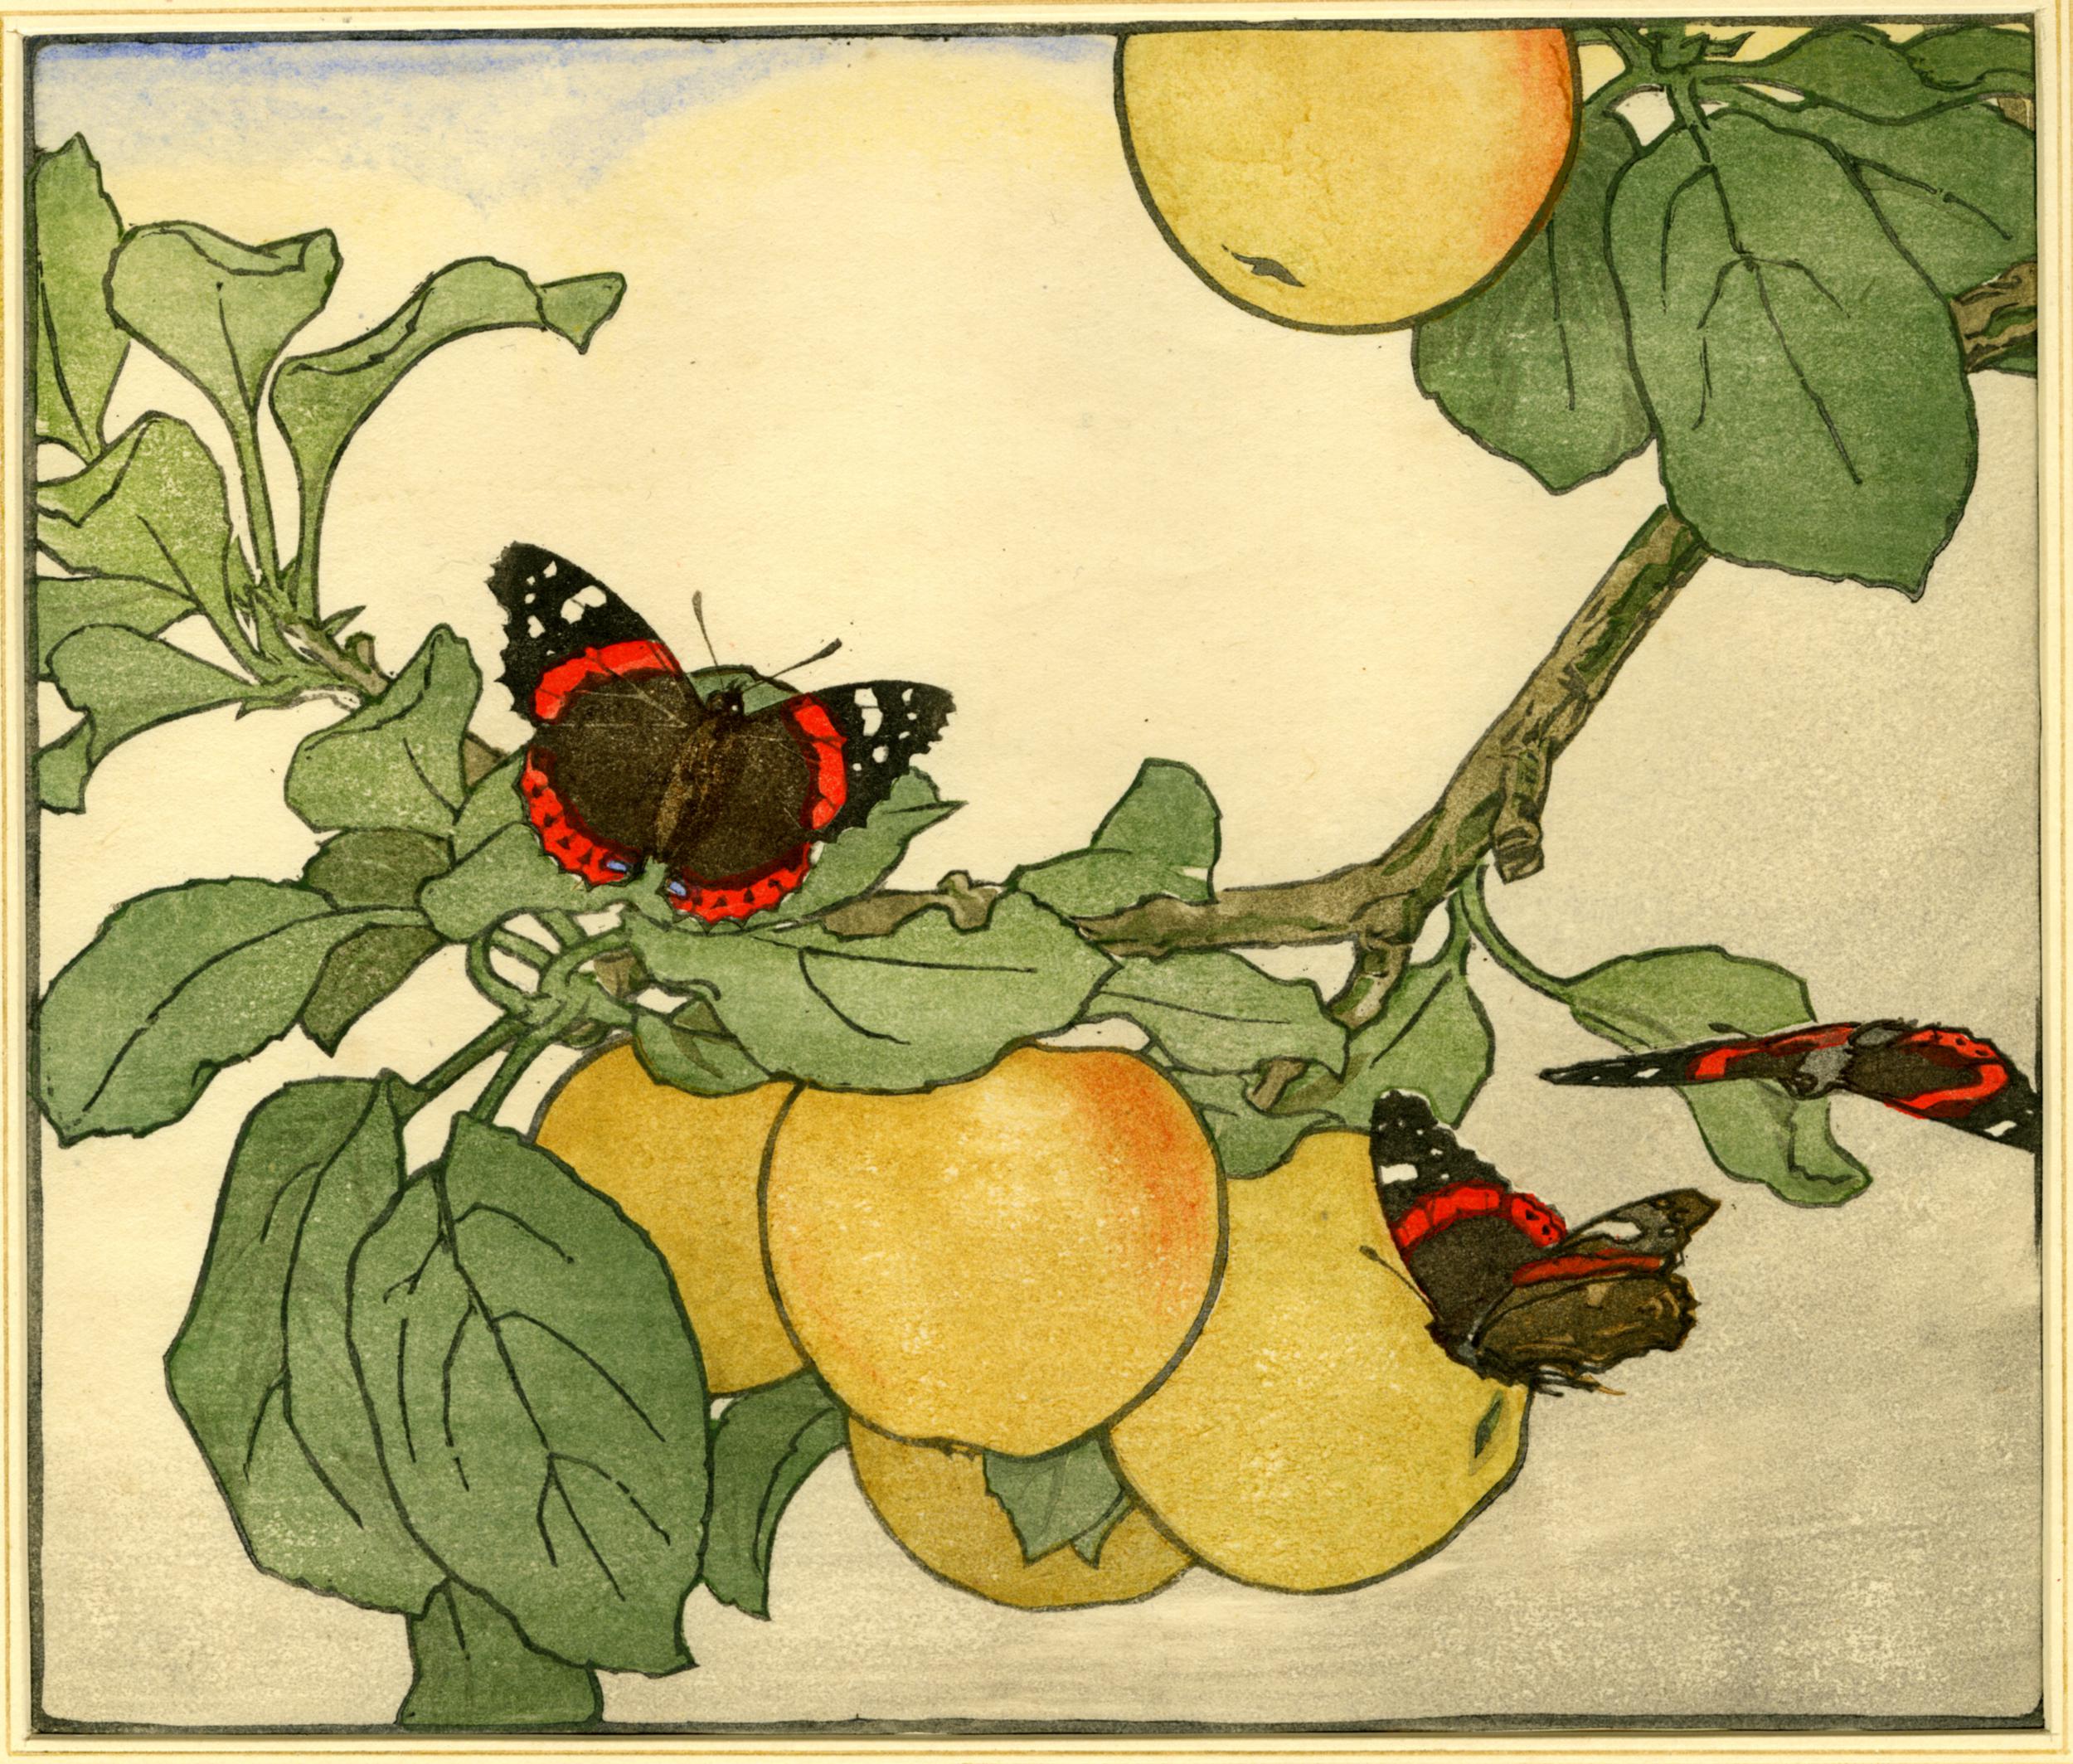 Apples and Red Admirals (1920)